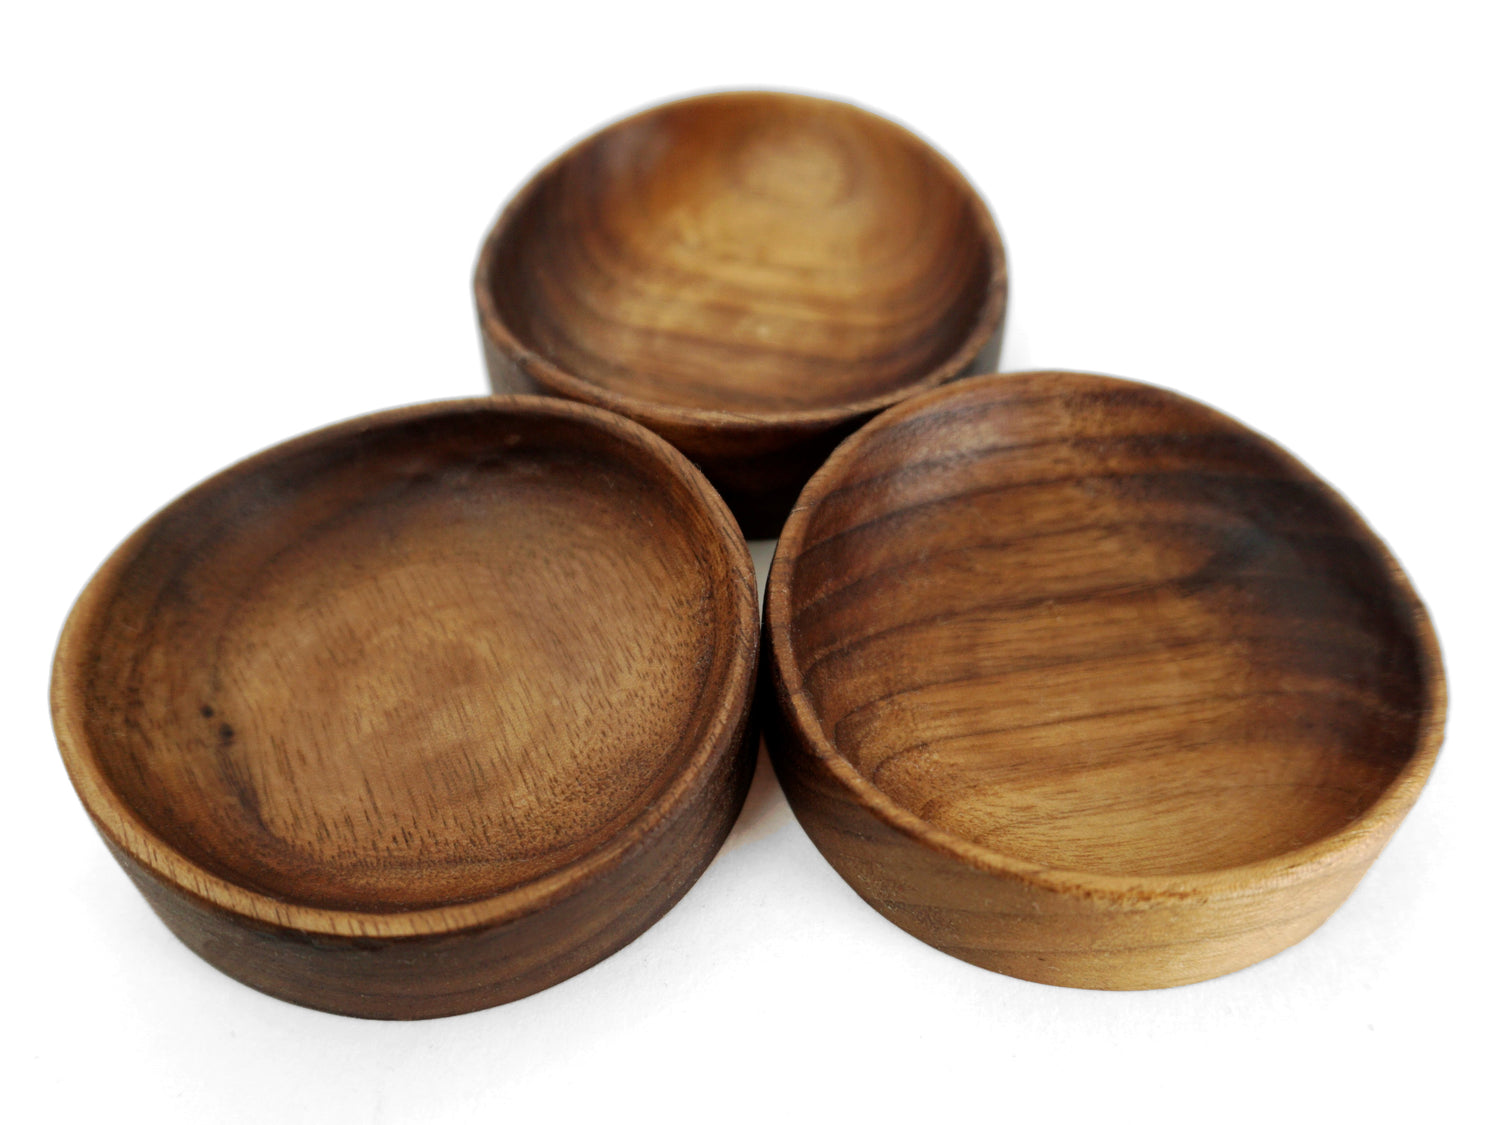 Group of 3 curvy round wooden ring dishes for desktop